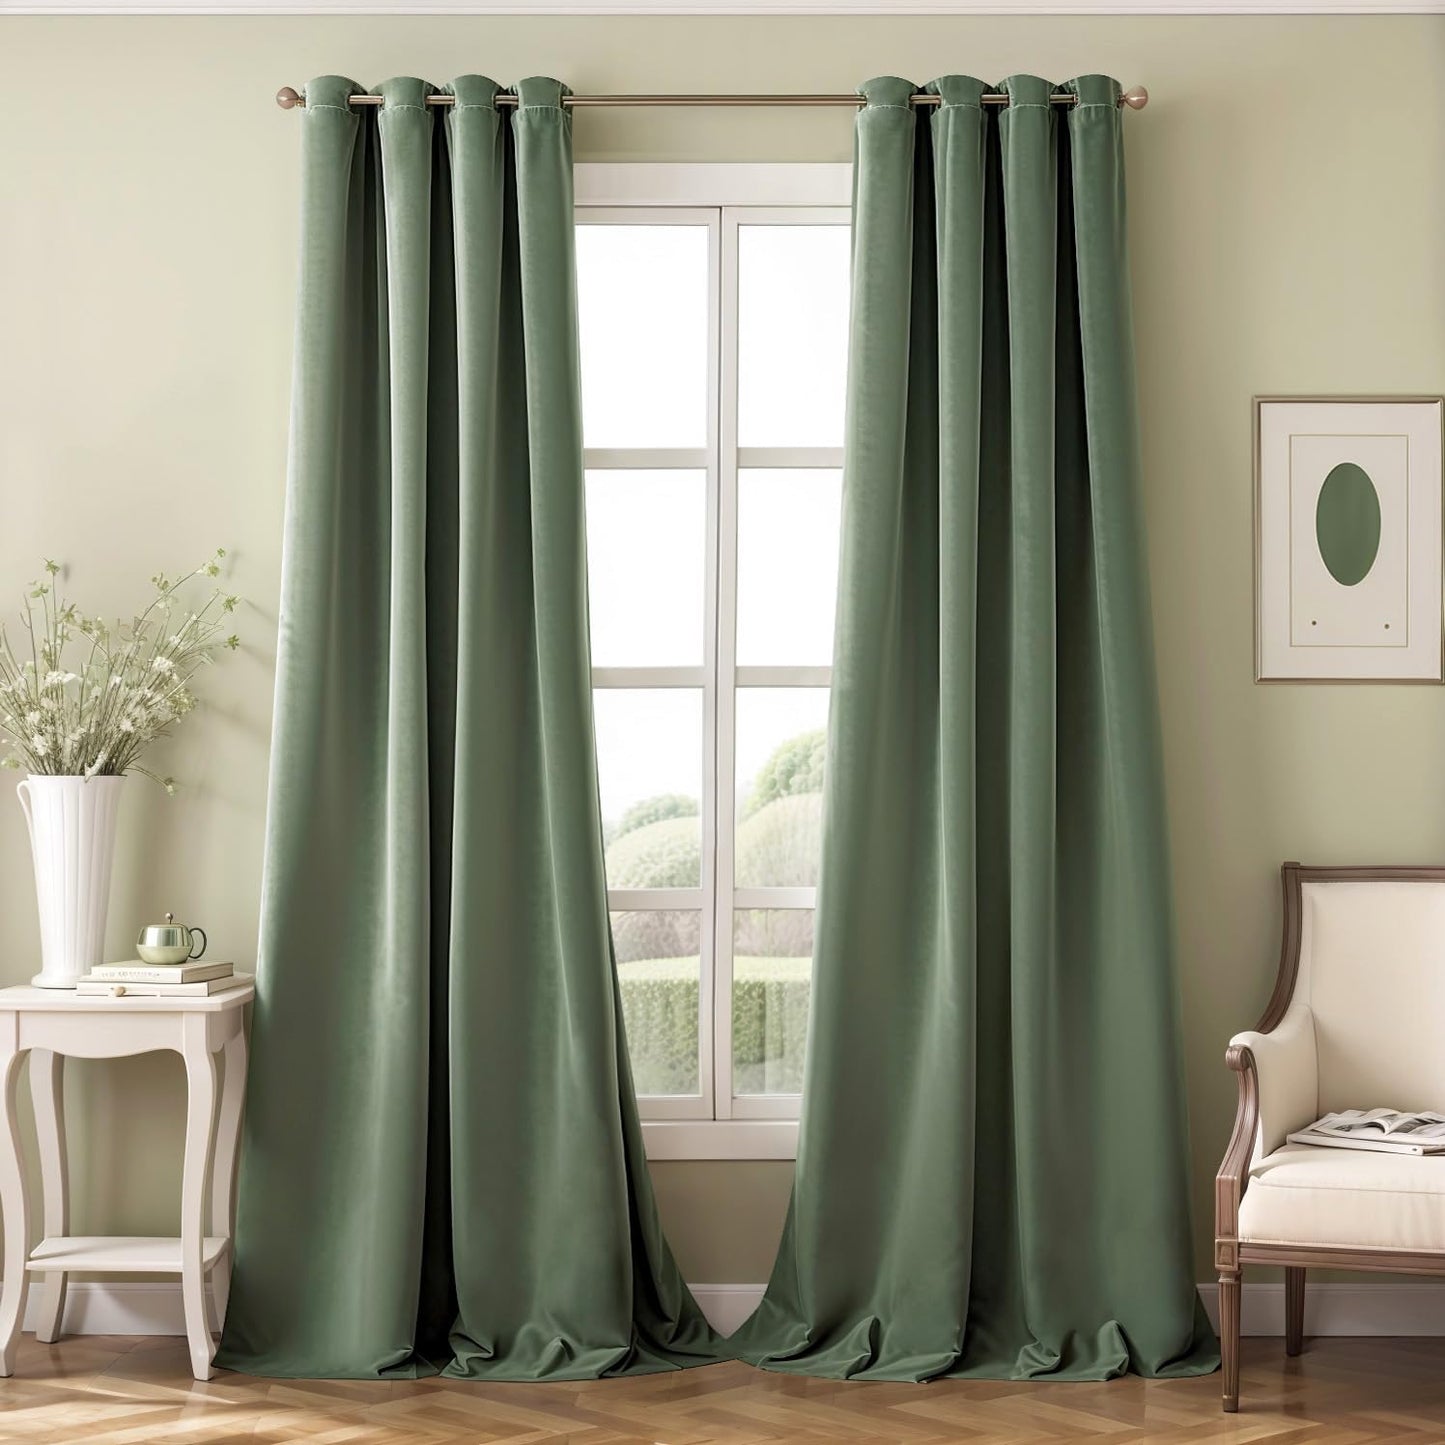 MIULEE Velvet Curtains Olive Green Elegant Grommet Curtains Thermal Insulated Soundproof Room Darkening Curtains/Drapes for Classical Living Room Bedroom Decor 52 X 84 Inch Set of 2  MIULEE Sage Green W52 X L96 